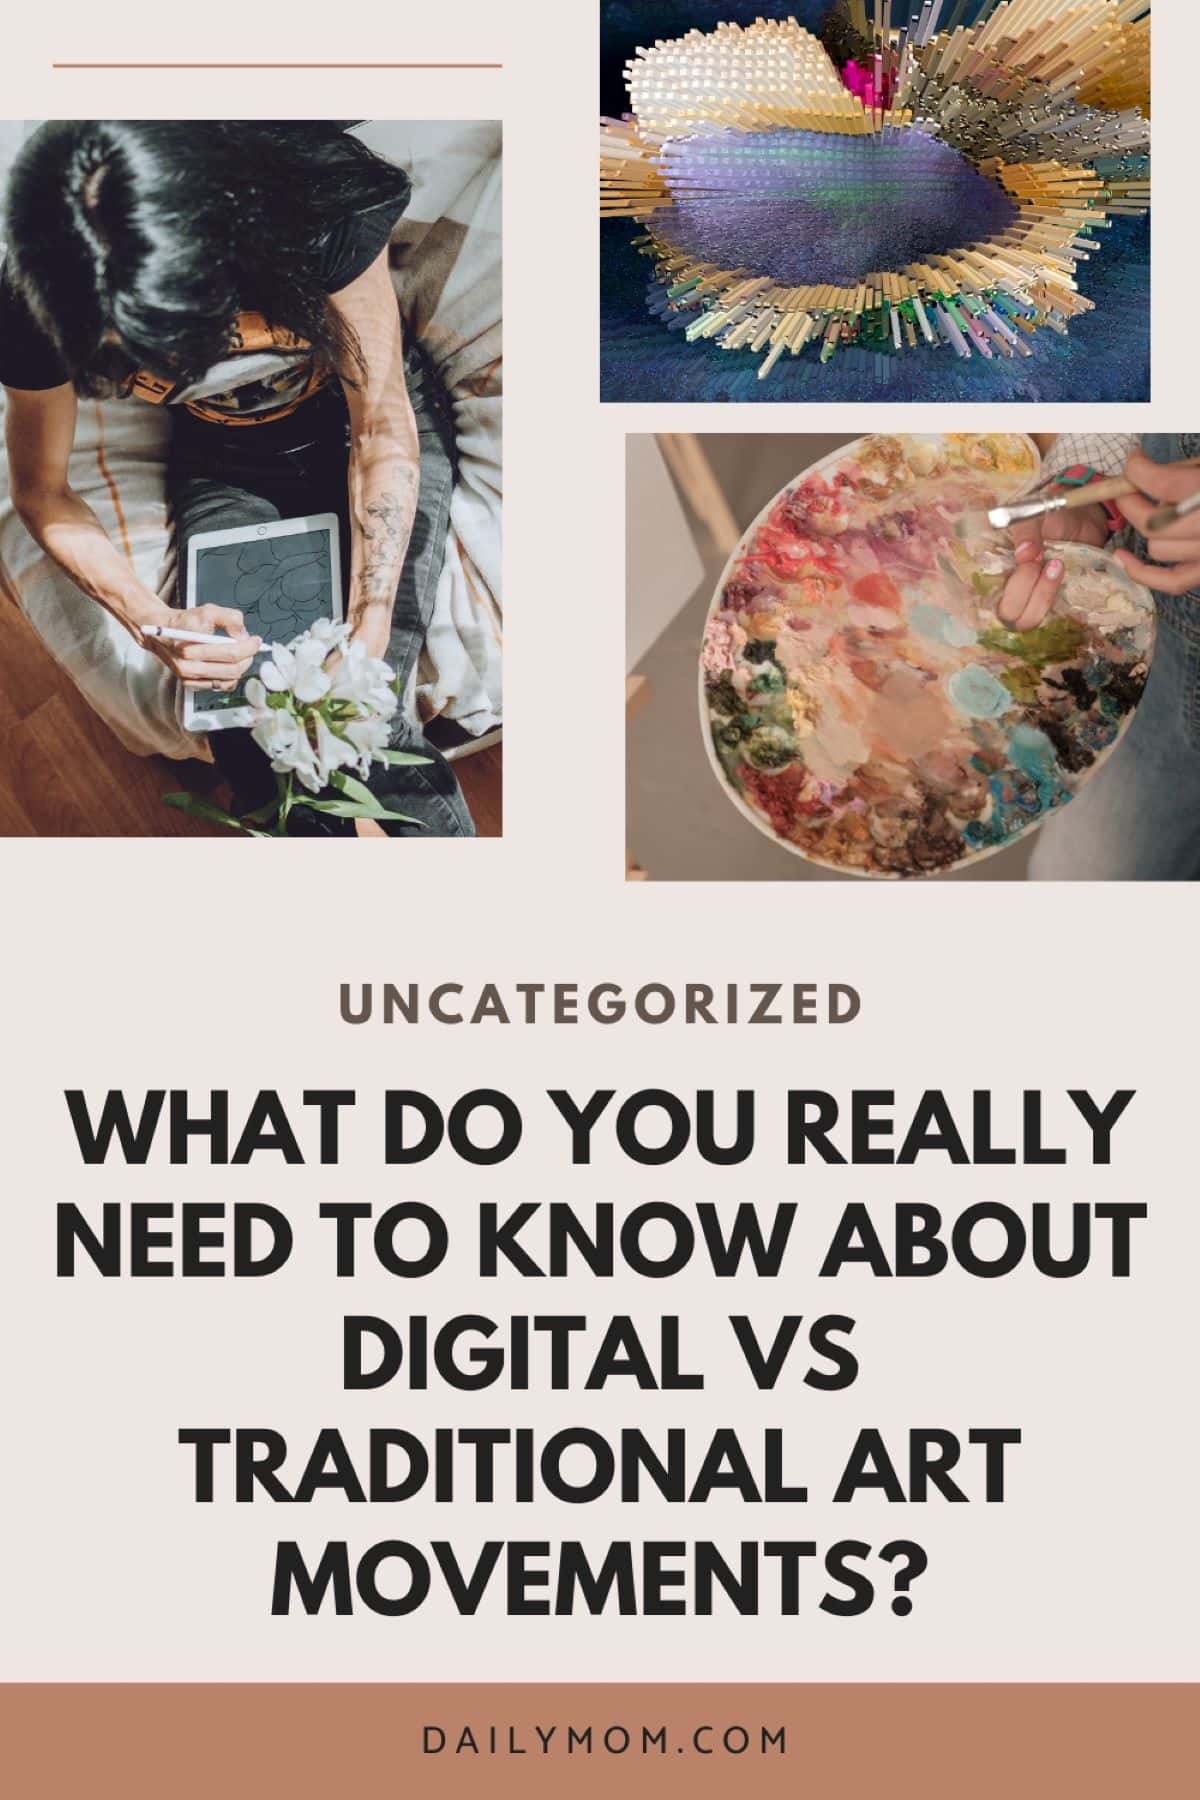 Traditional Art Vs Digital Art Vs The 21St Century: Differences, Similarities, And The Pros And Cons 5 Daily Mom, Magazine For Families